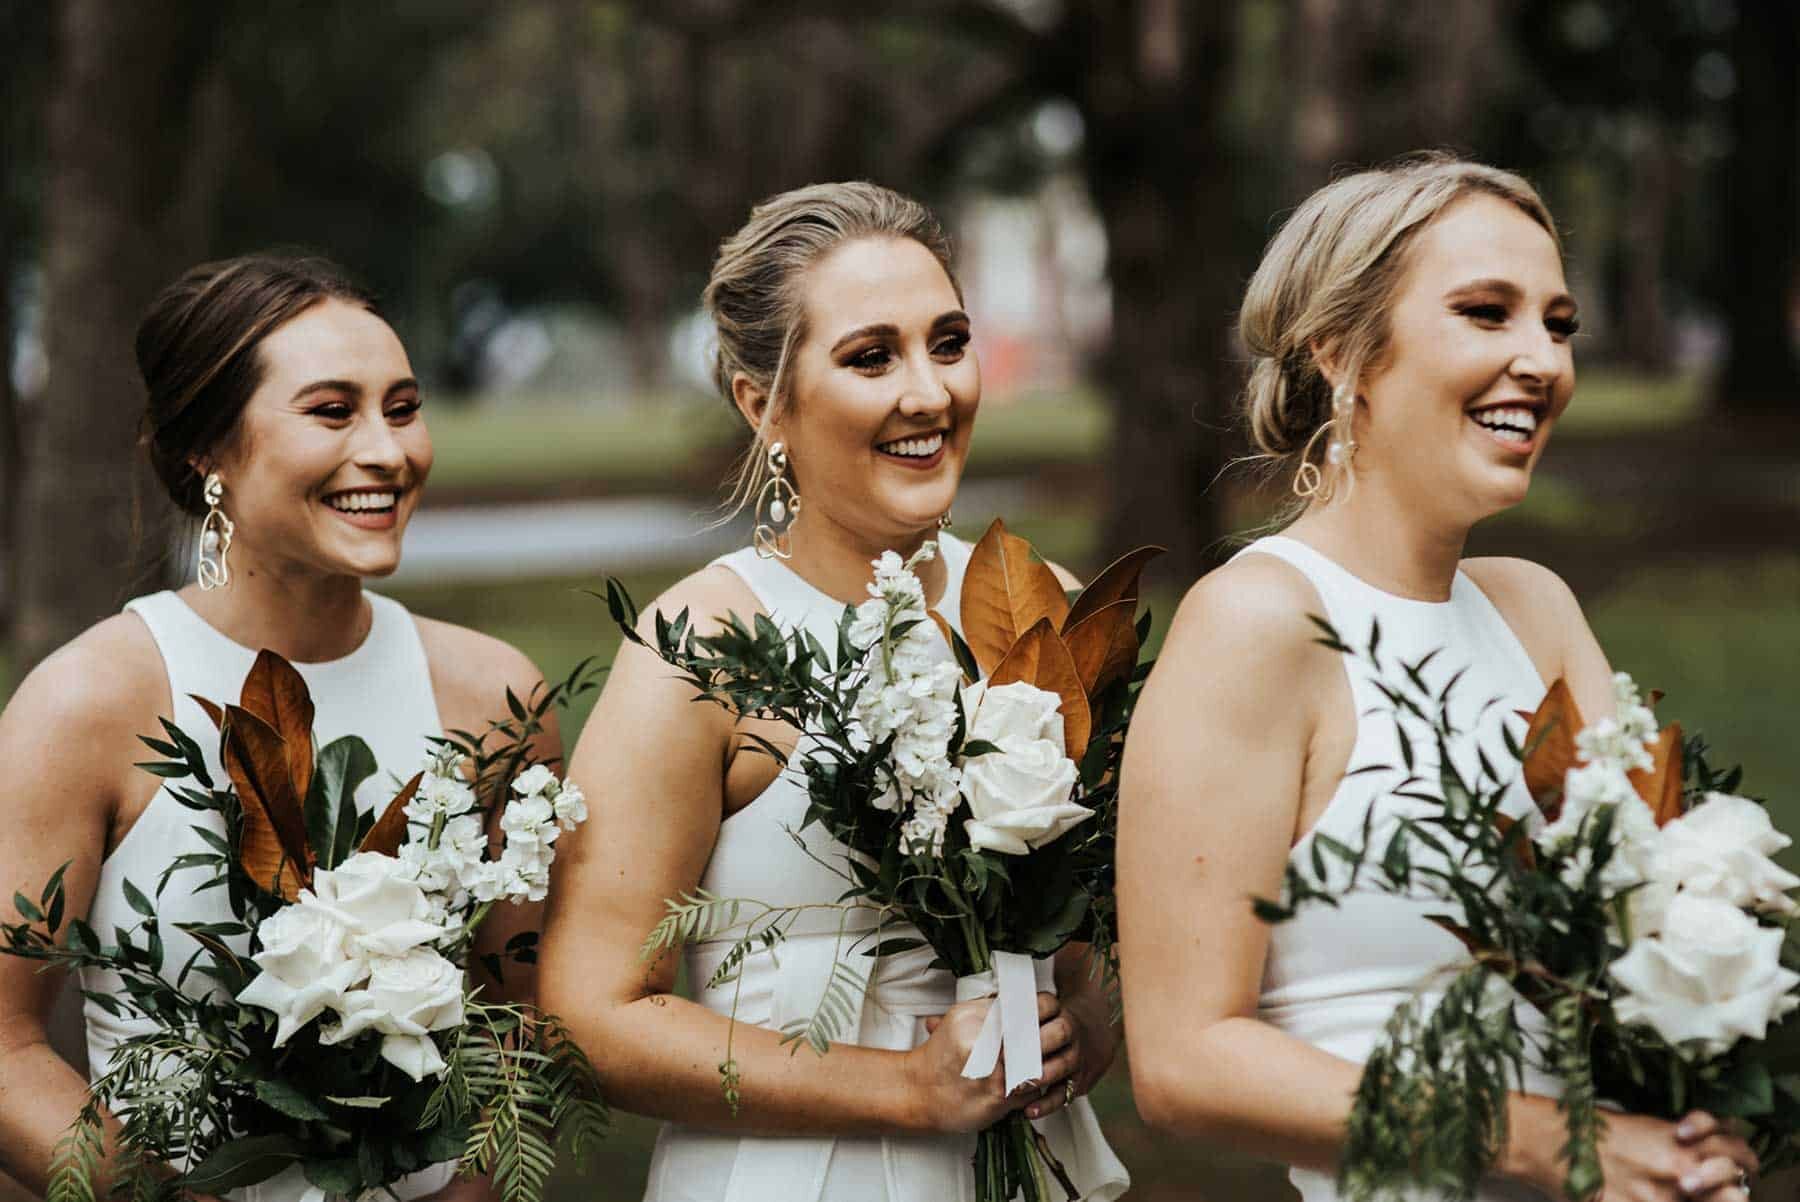 modern and simple all-white bridesmaids